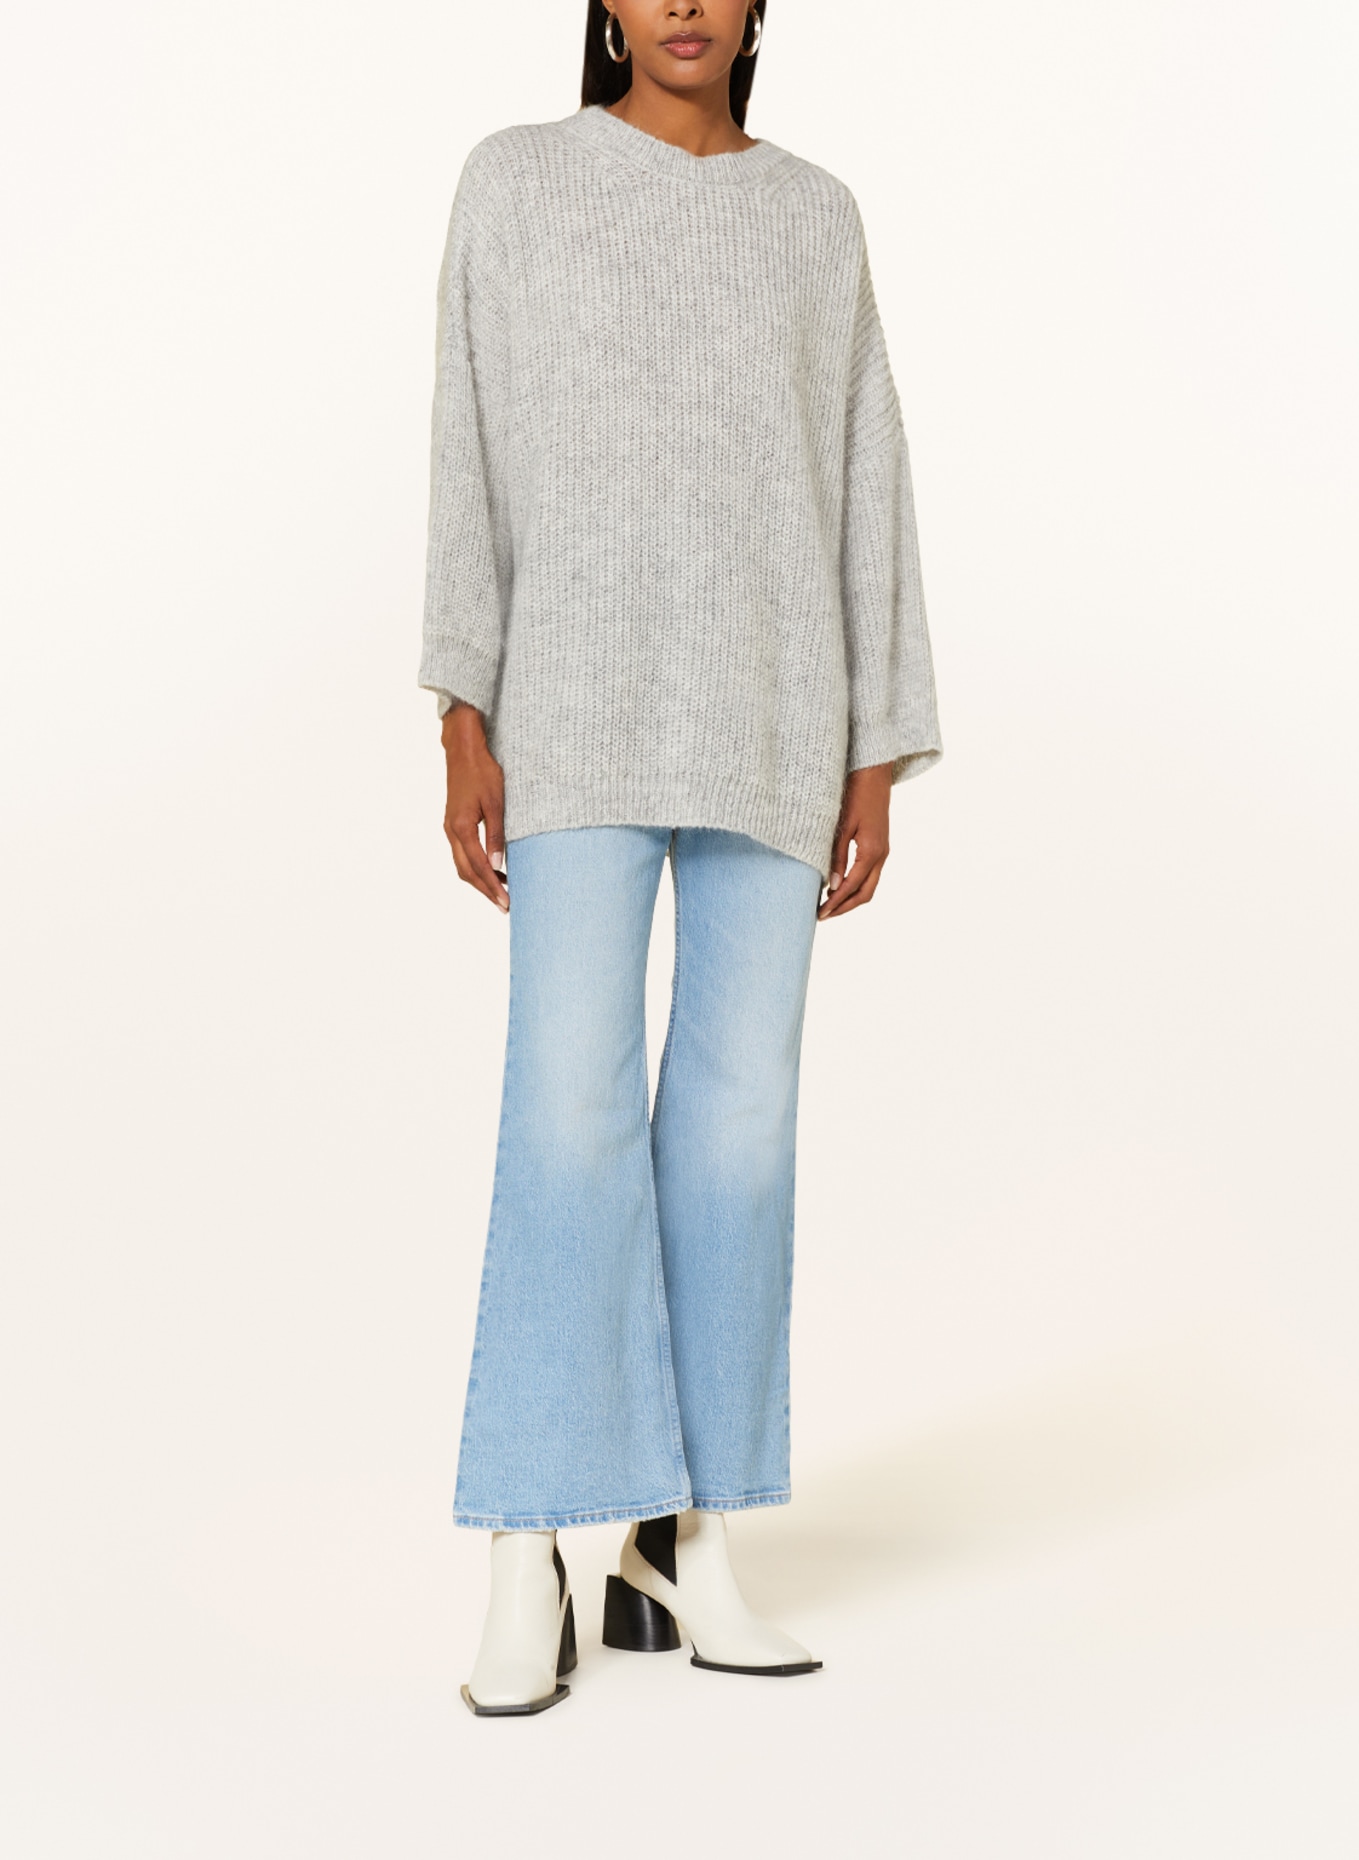 summum woman Sweater with mohair and 3/4 sleeves, Color: LIGHT GRAY (Image 2)